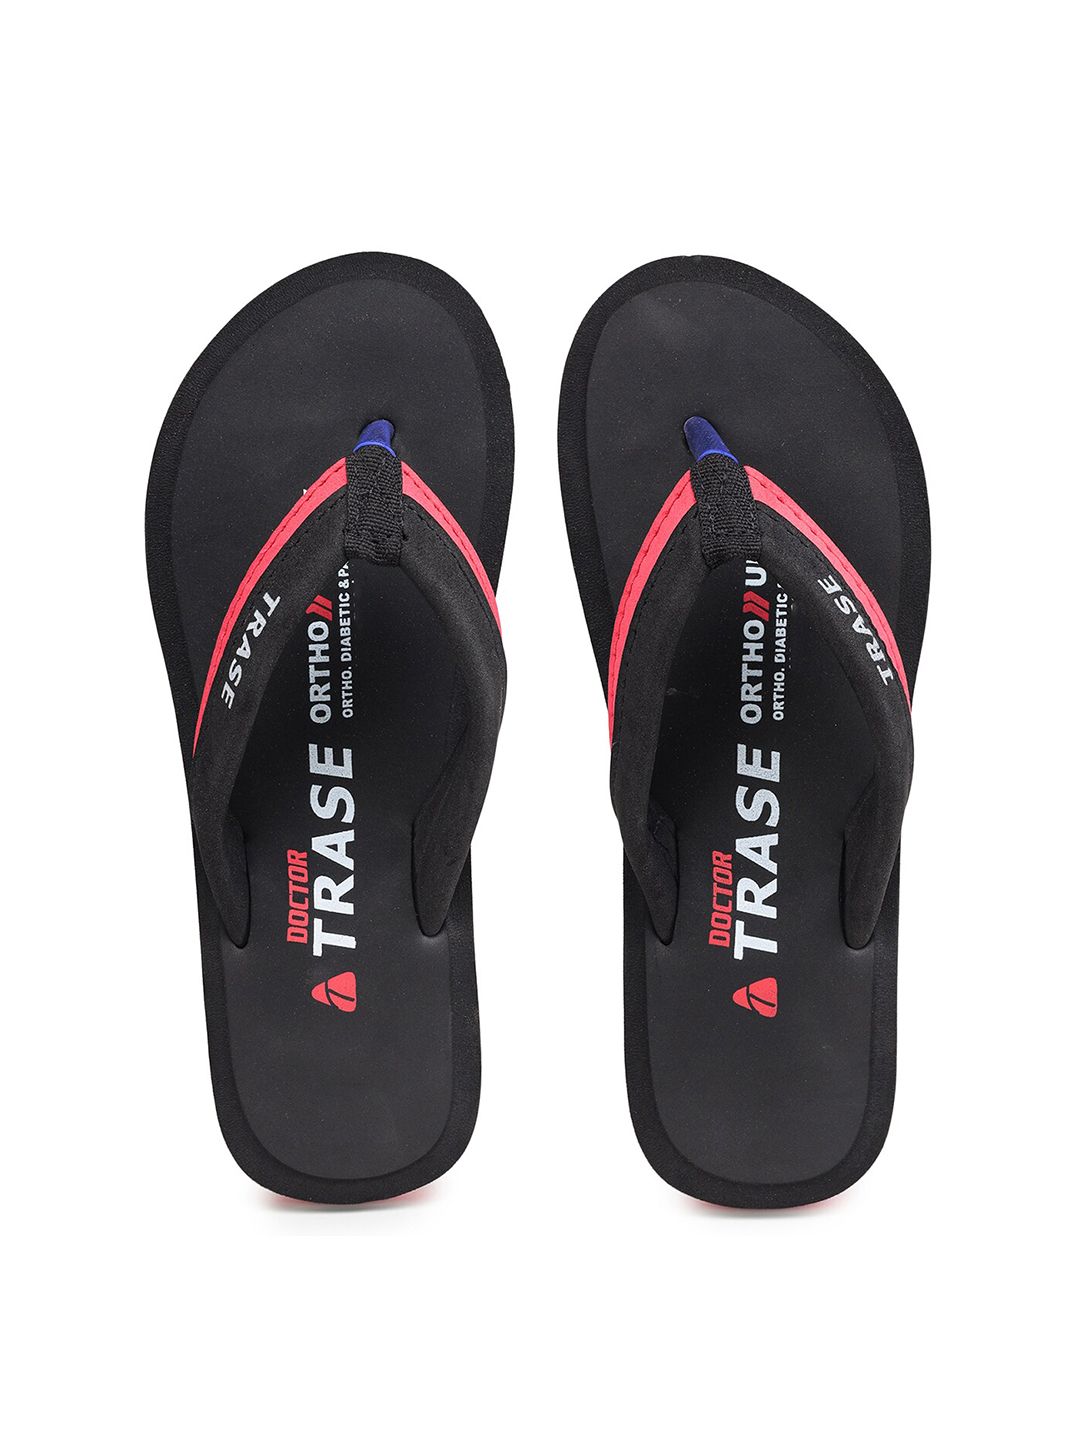 TRASE Women Black & Peach-Coloured Printed Thong Flip-Flops Price in India